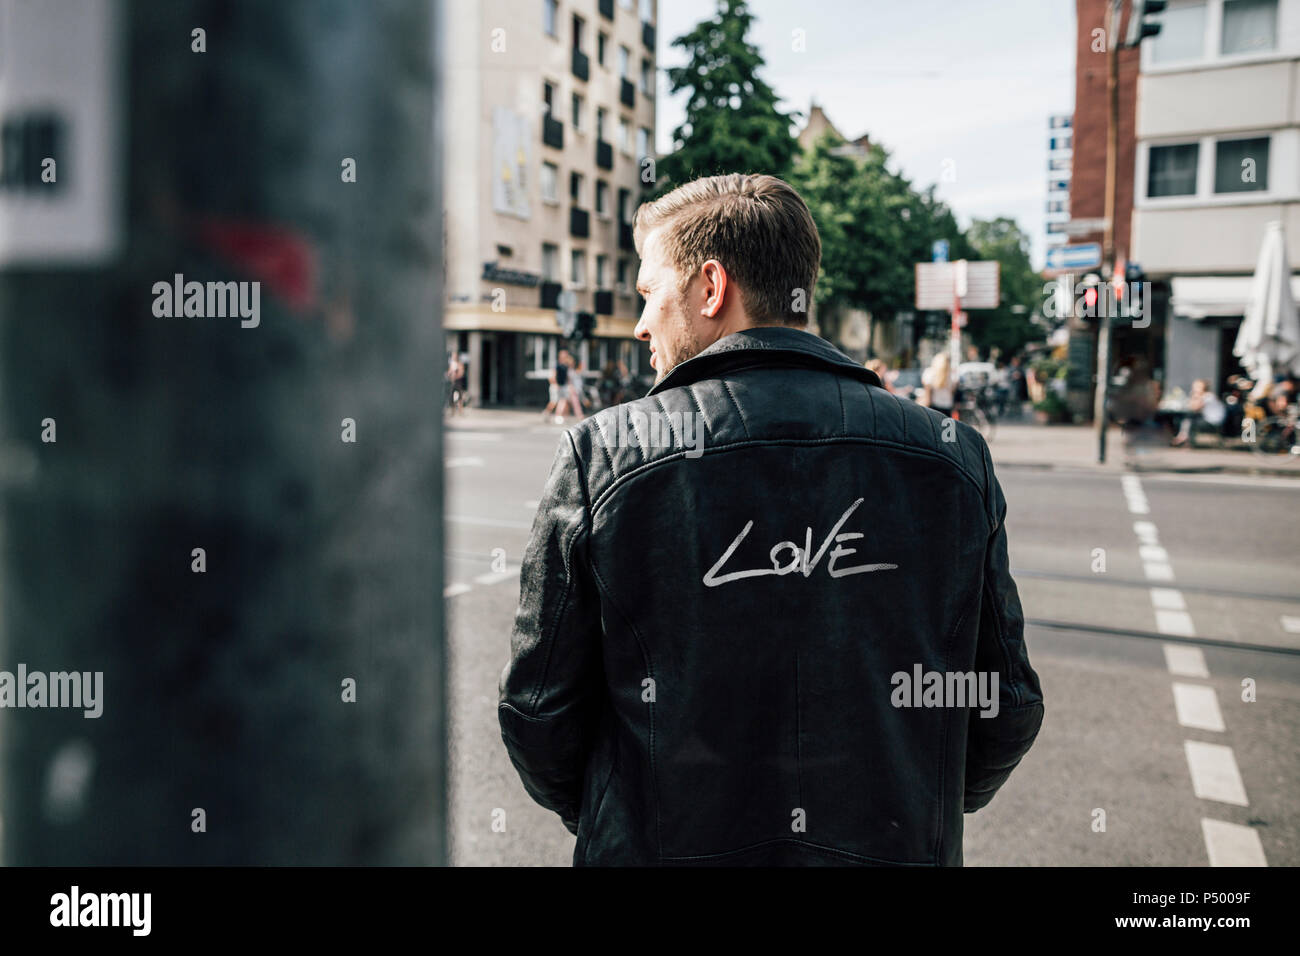 Back view of young man wearing black leather jacket with writing 'Love' Stock Photo